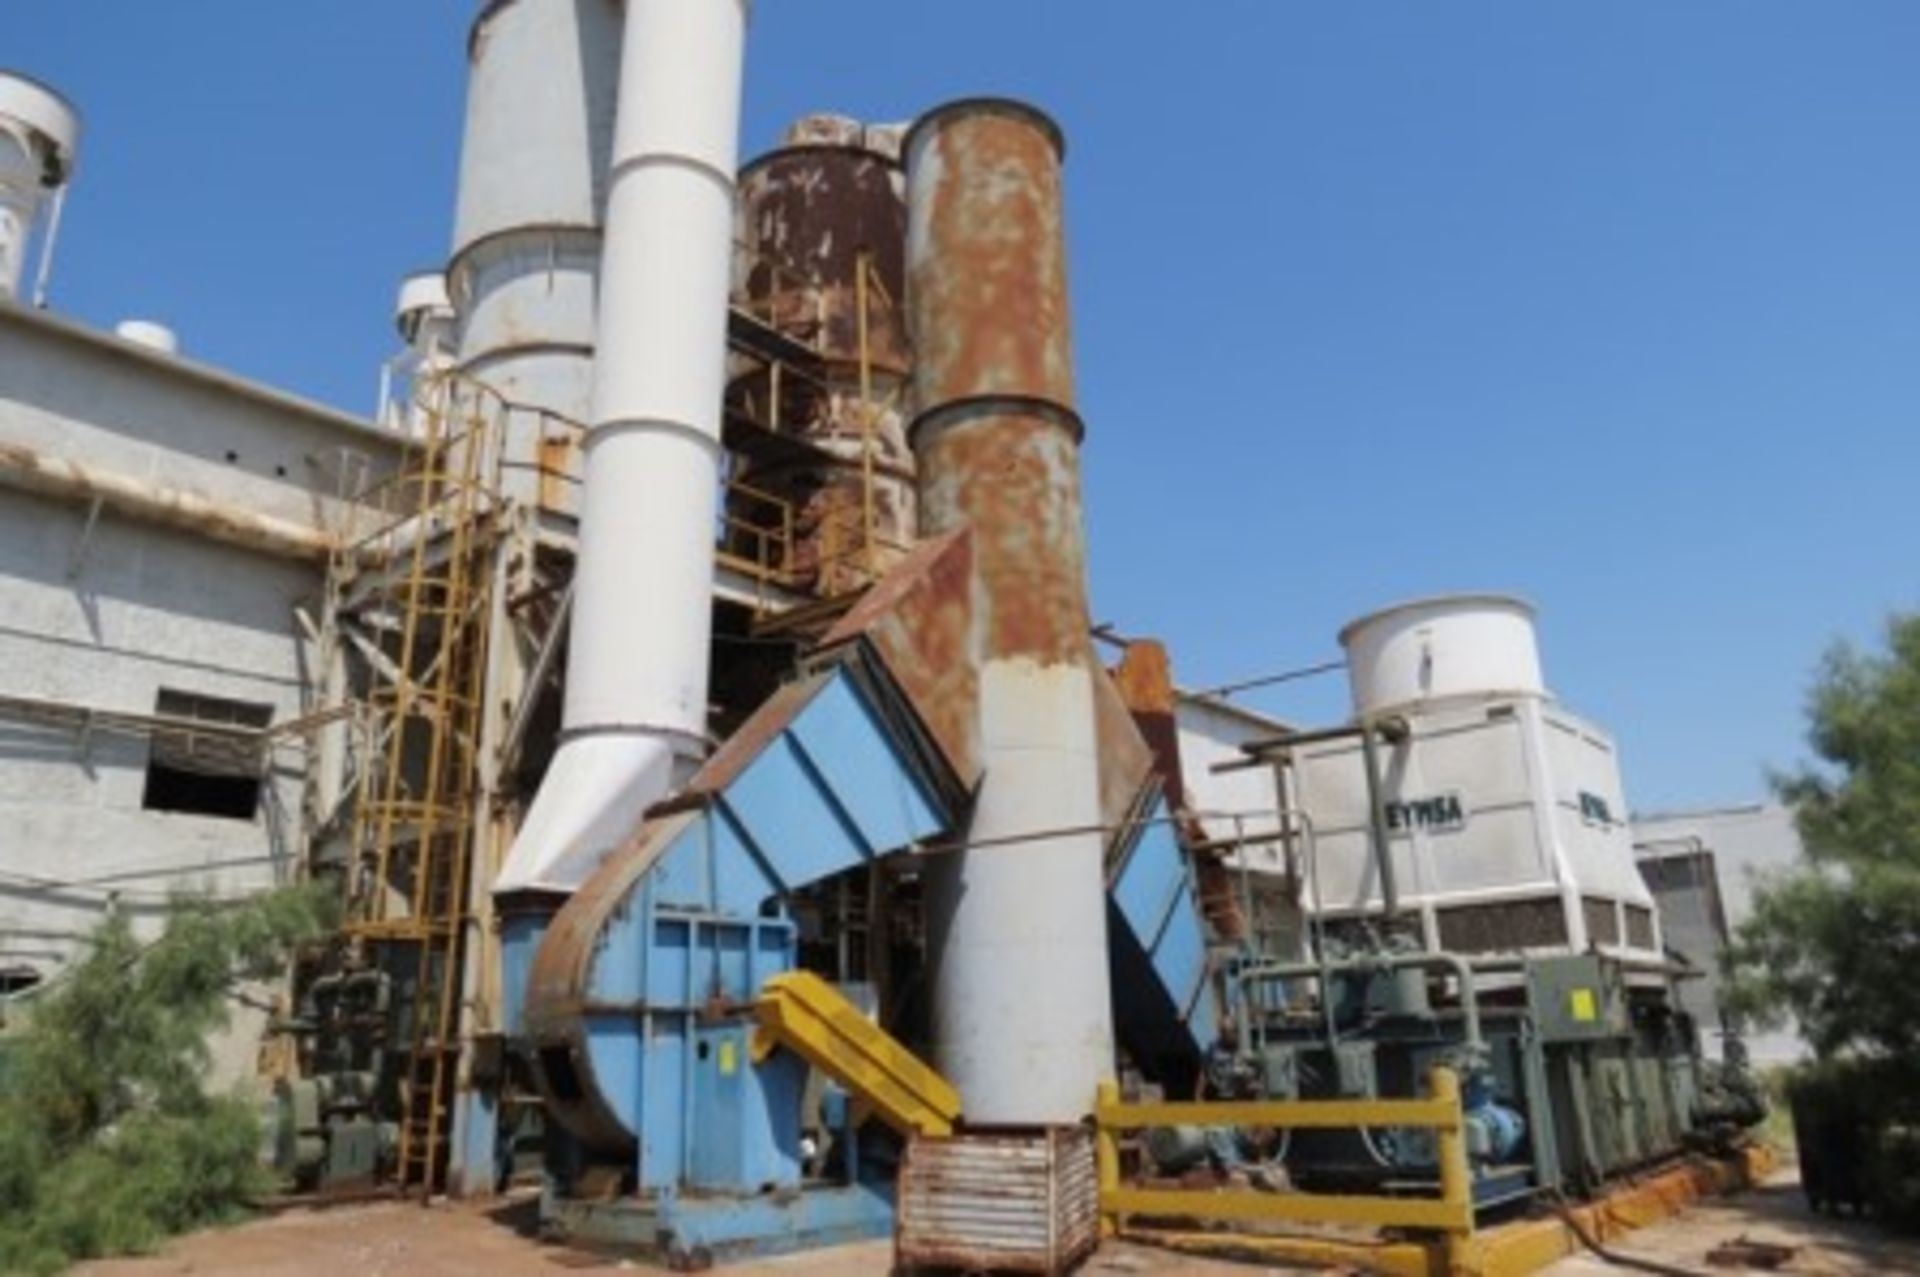 Dust collector, with 2 150 hp centrifugal blowers, filters, ducts, cooling tower